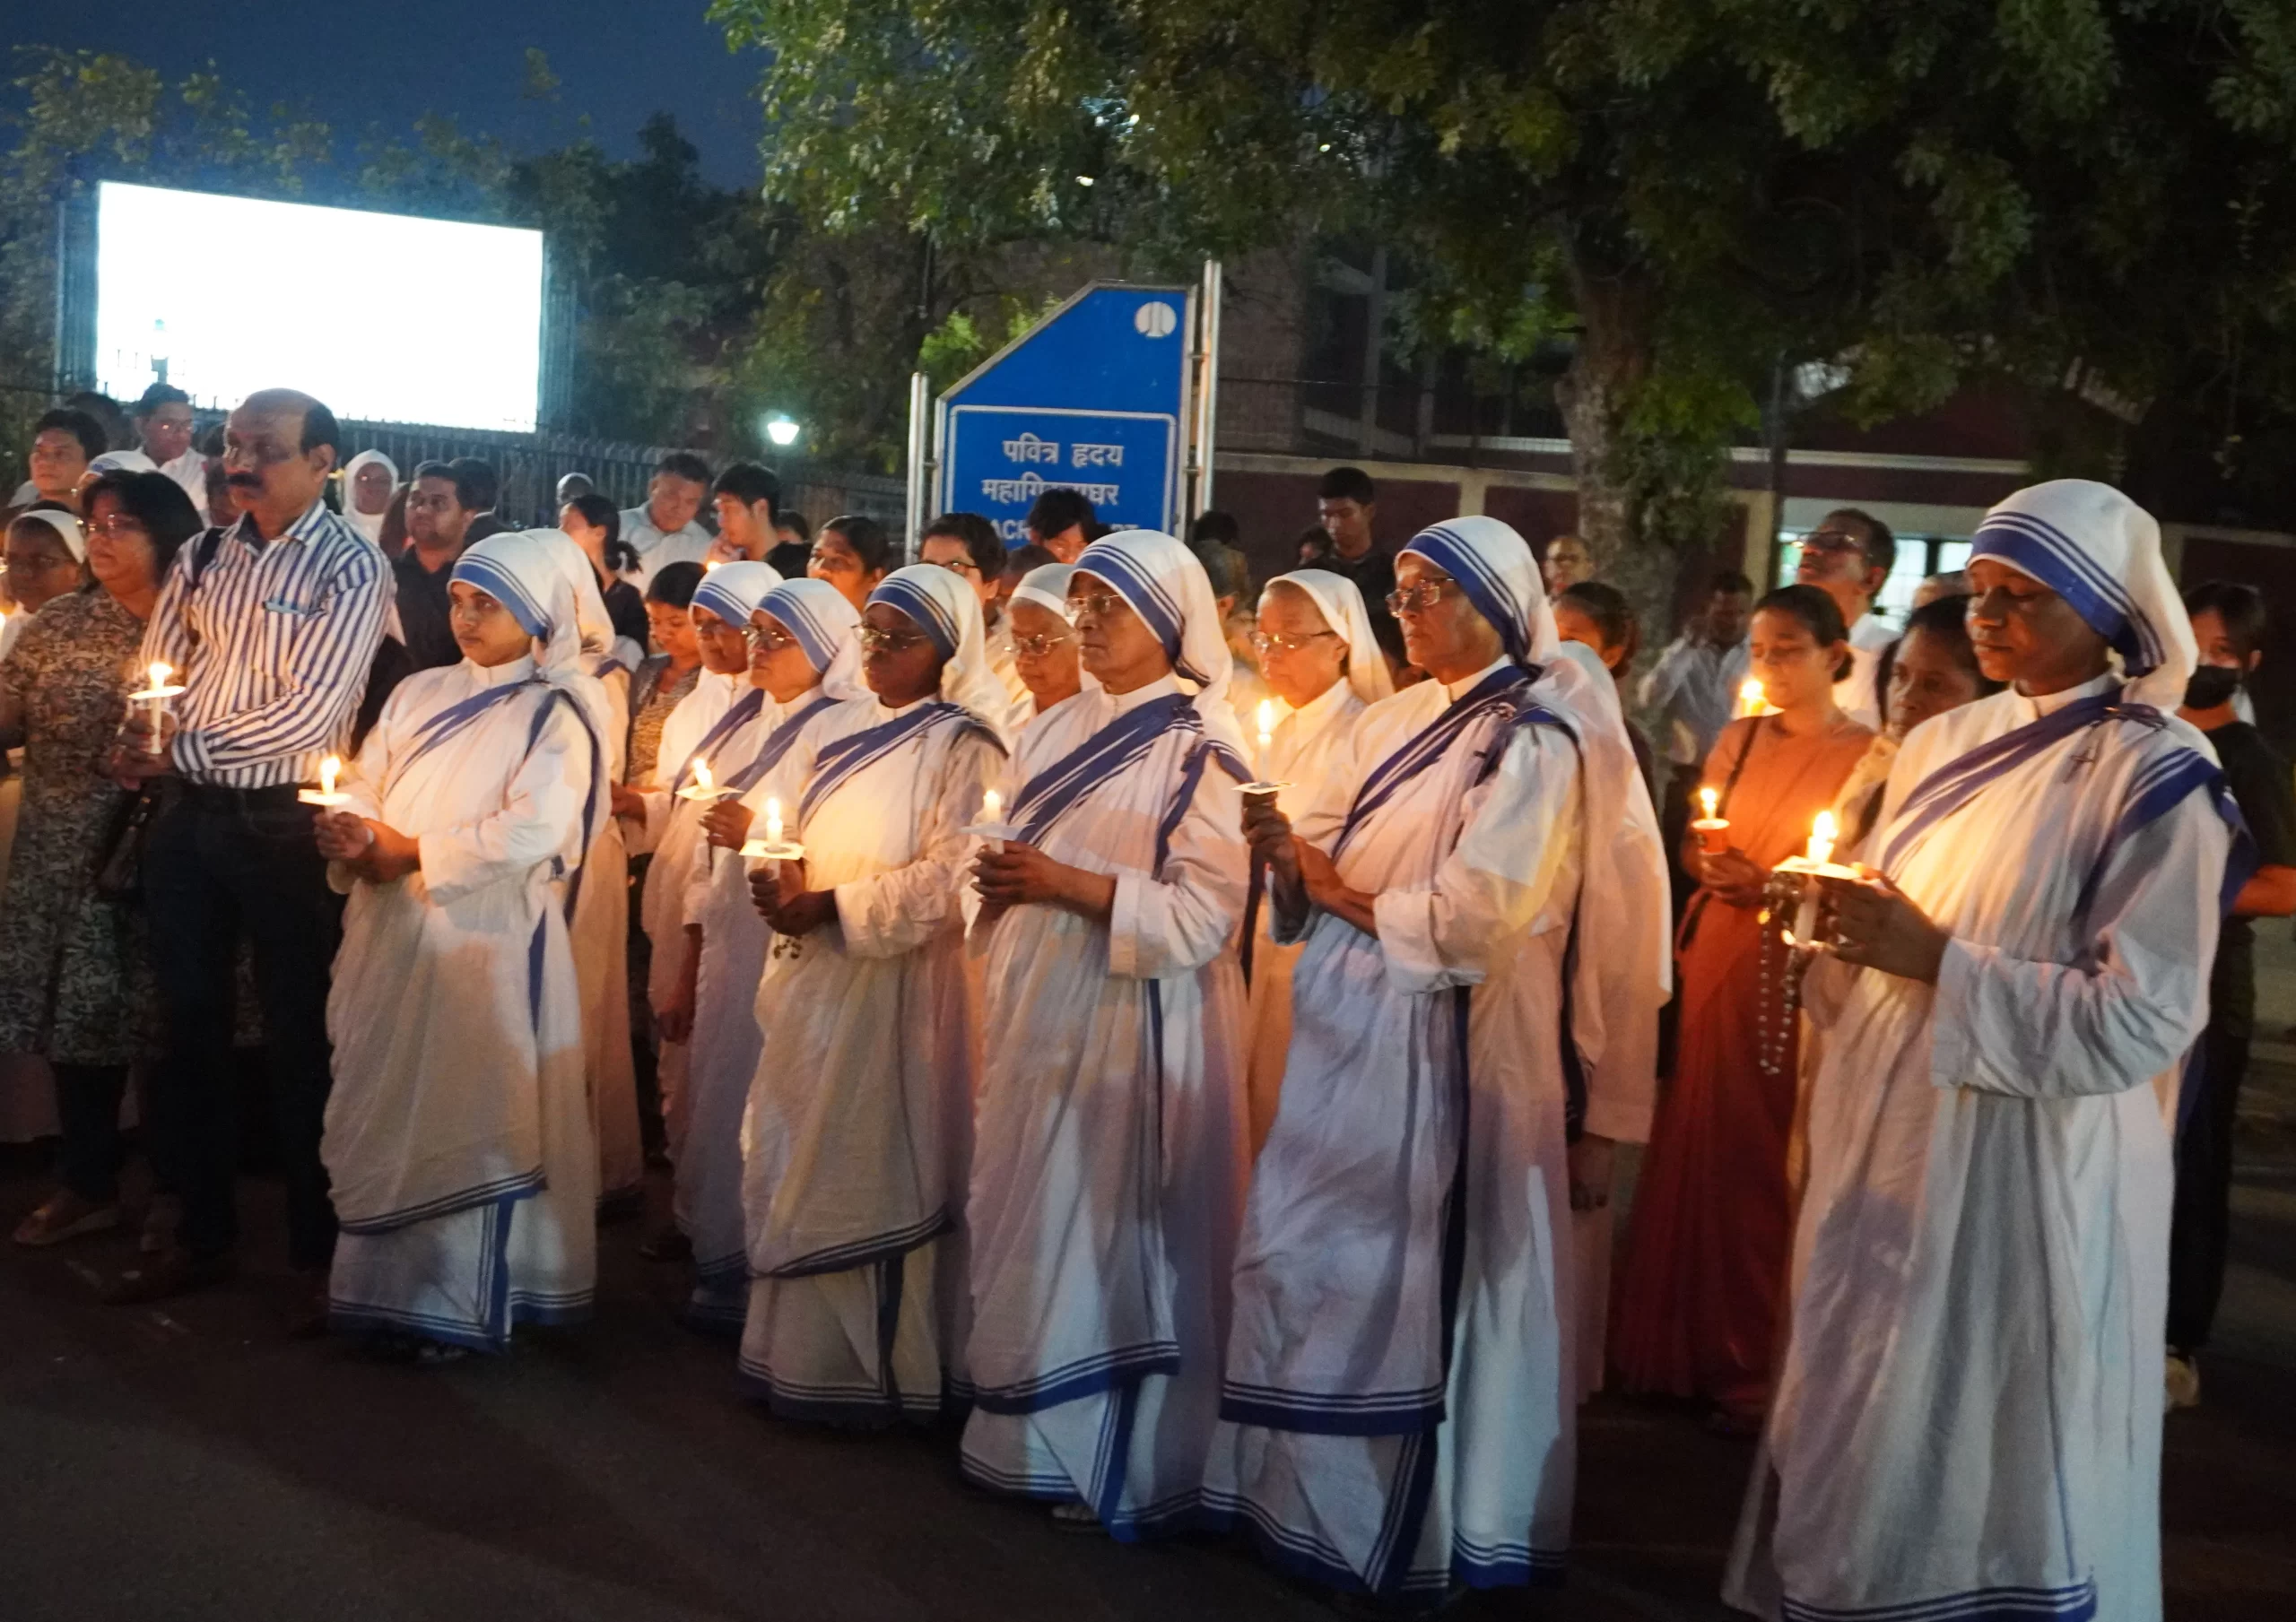 Nuns from the Missionaries of Charity hold candles in recognition of the May 3, 2023, annivesary of ethnic violence in Manipur, India. Credit: Anto Akkara